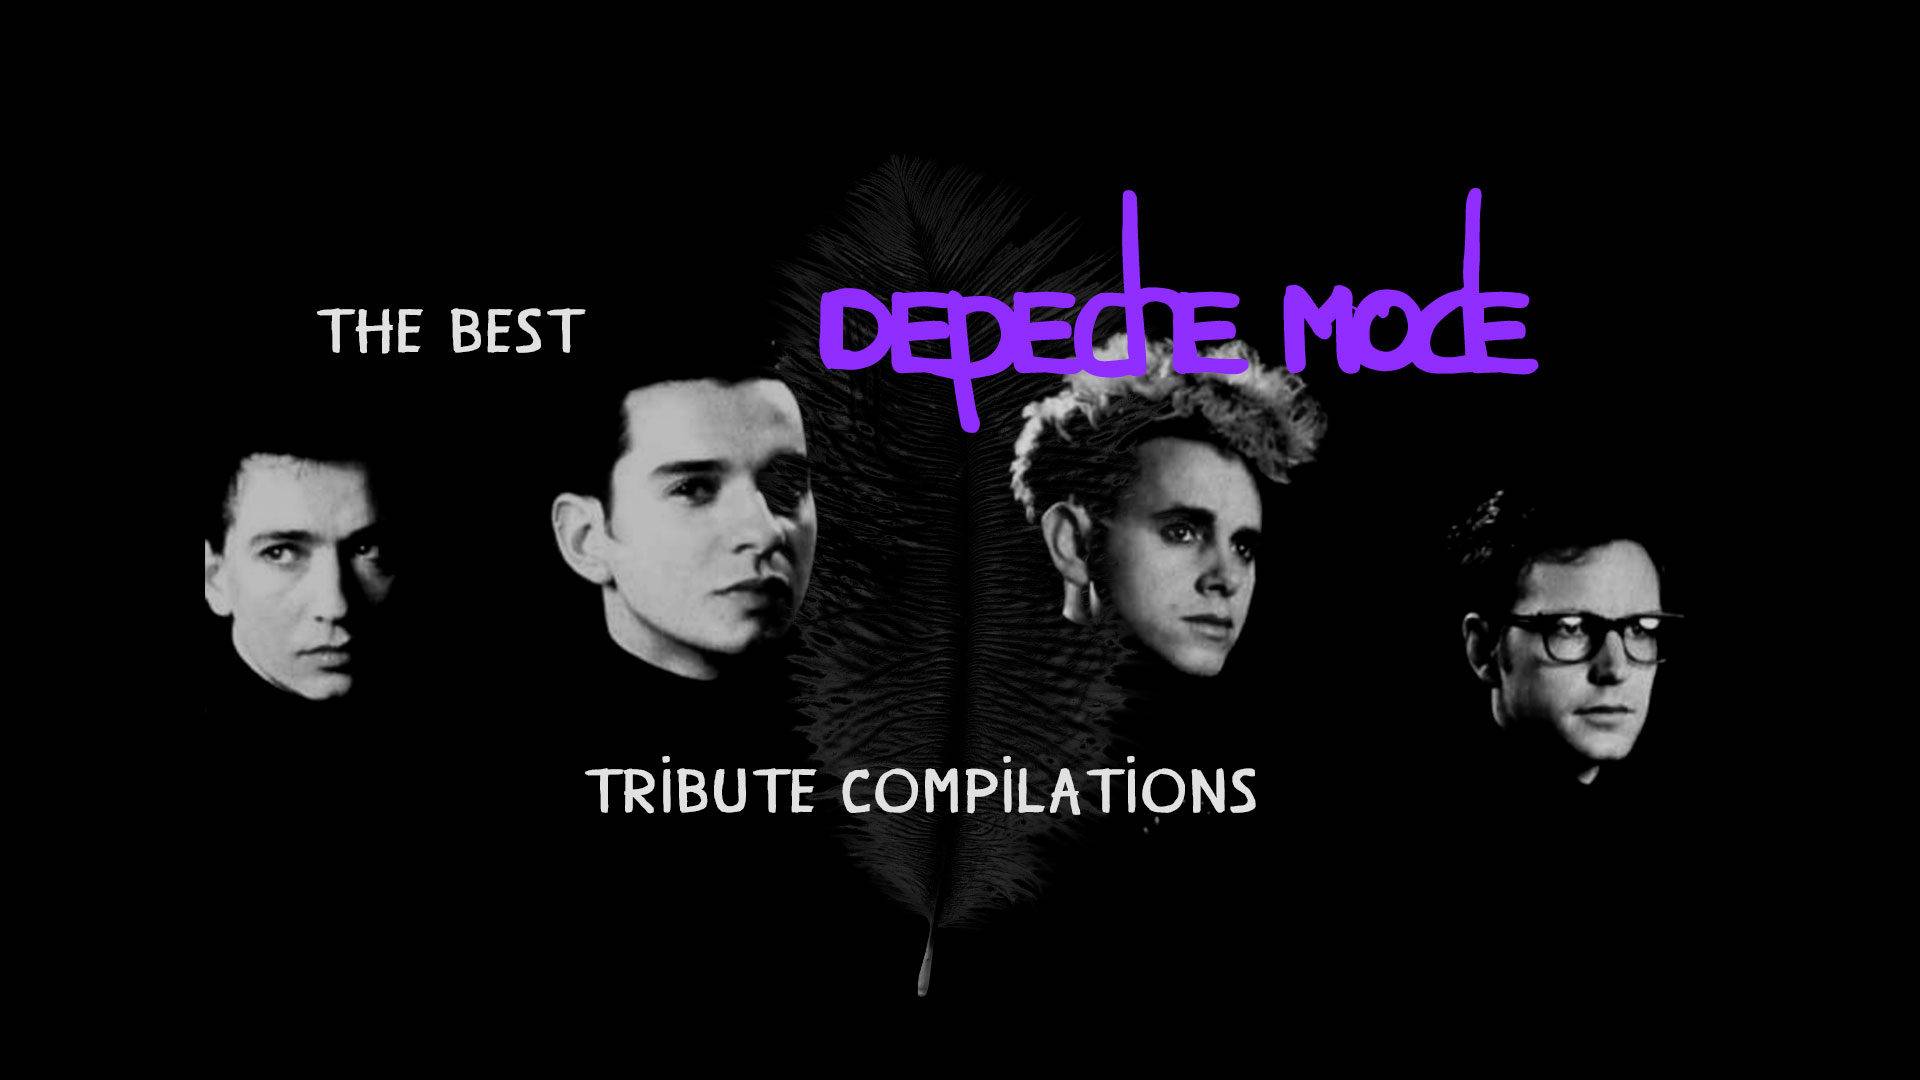 The best Depeche Mode tribute complilations